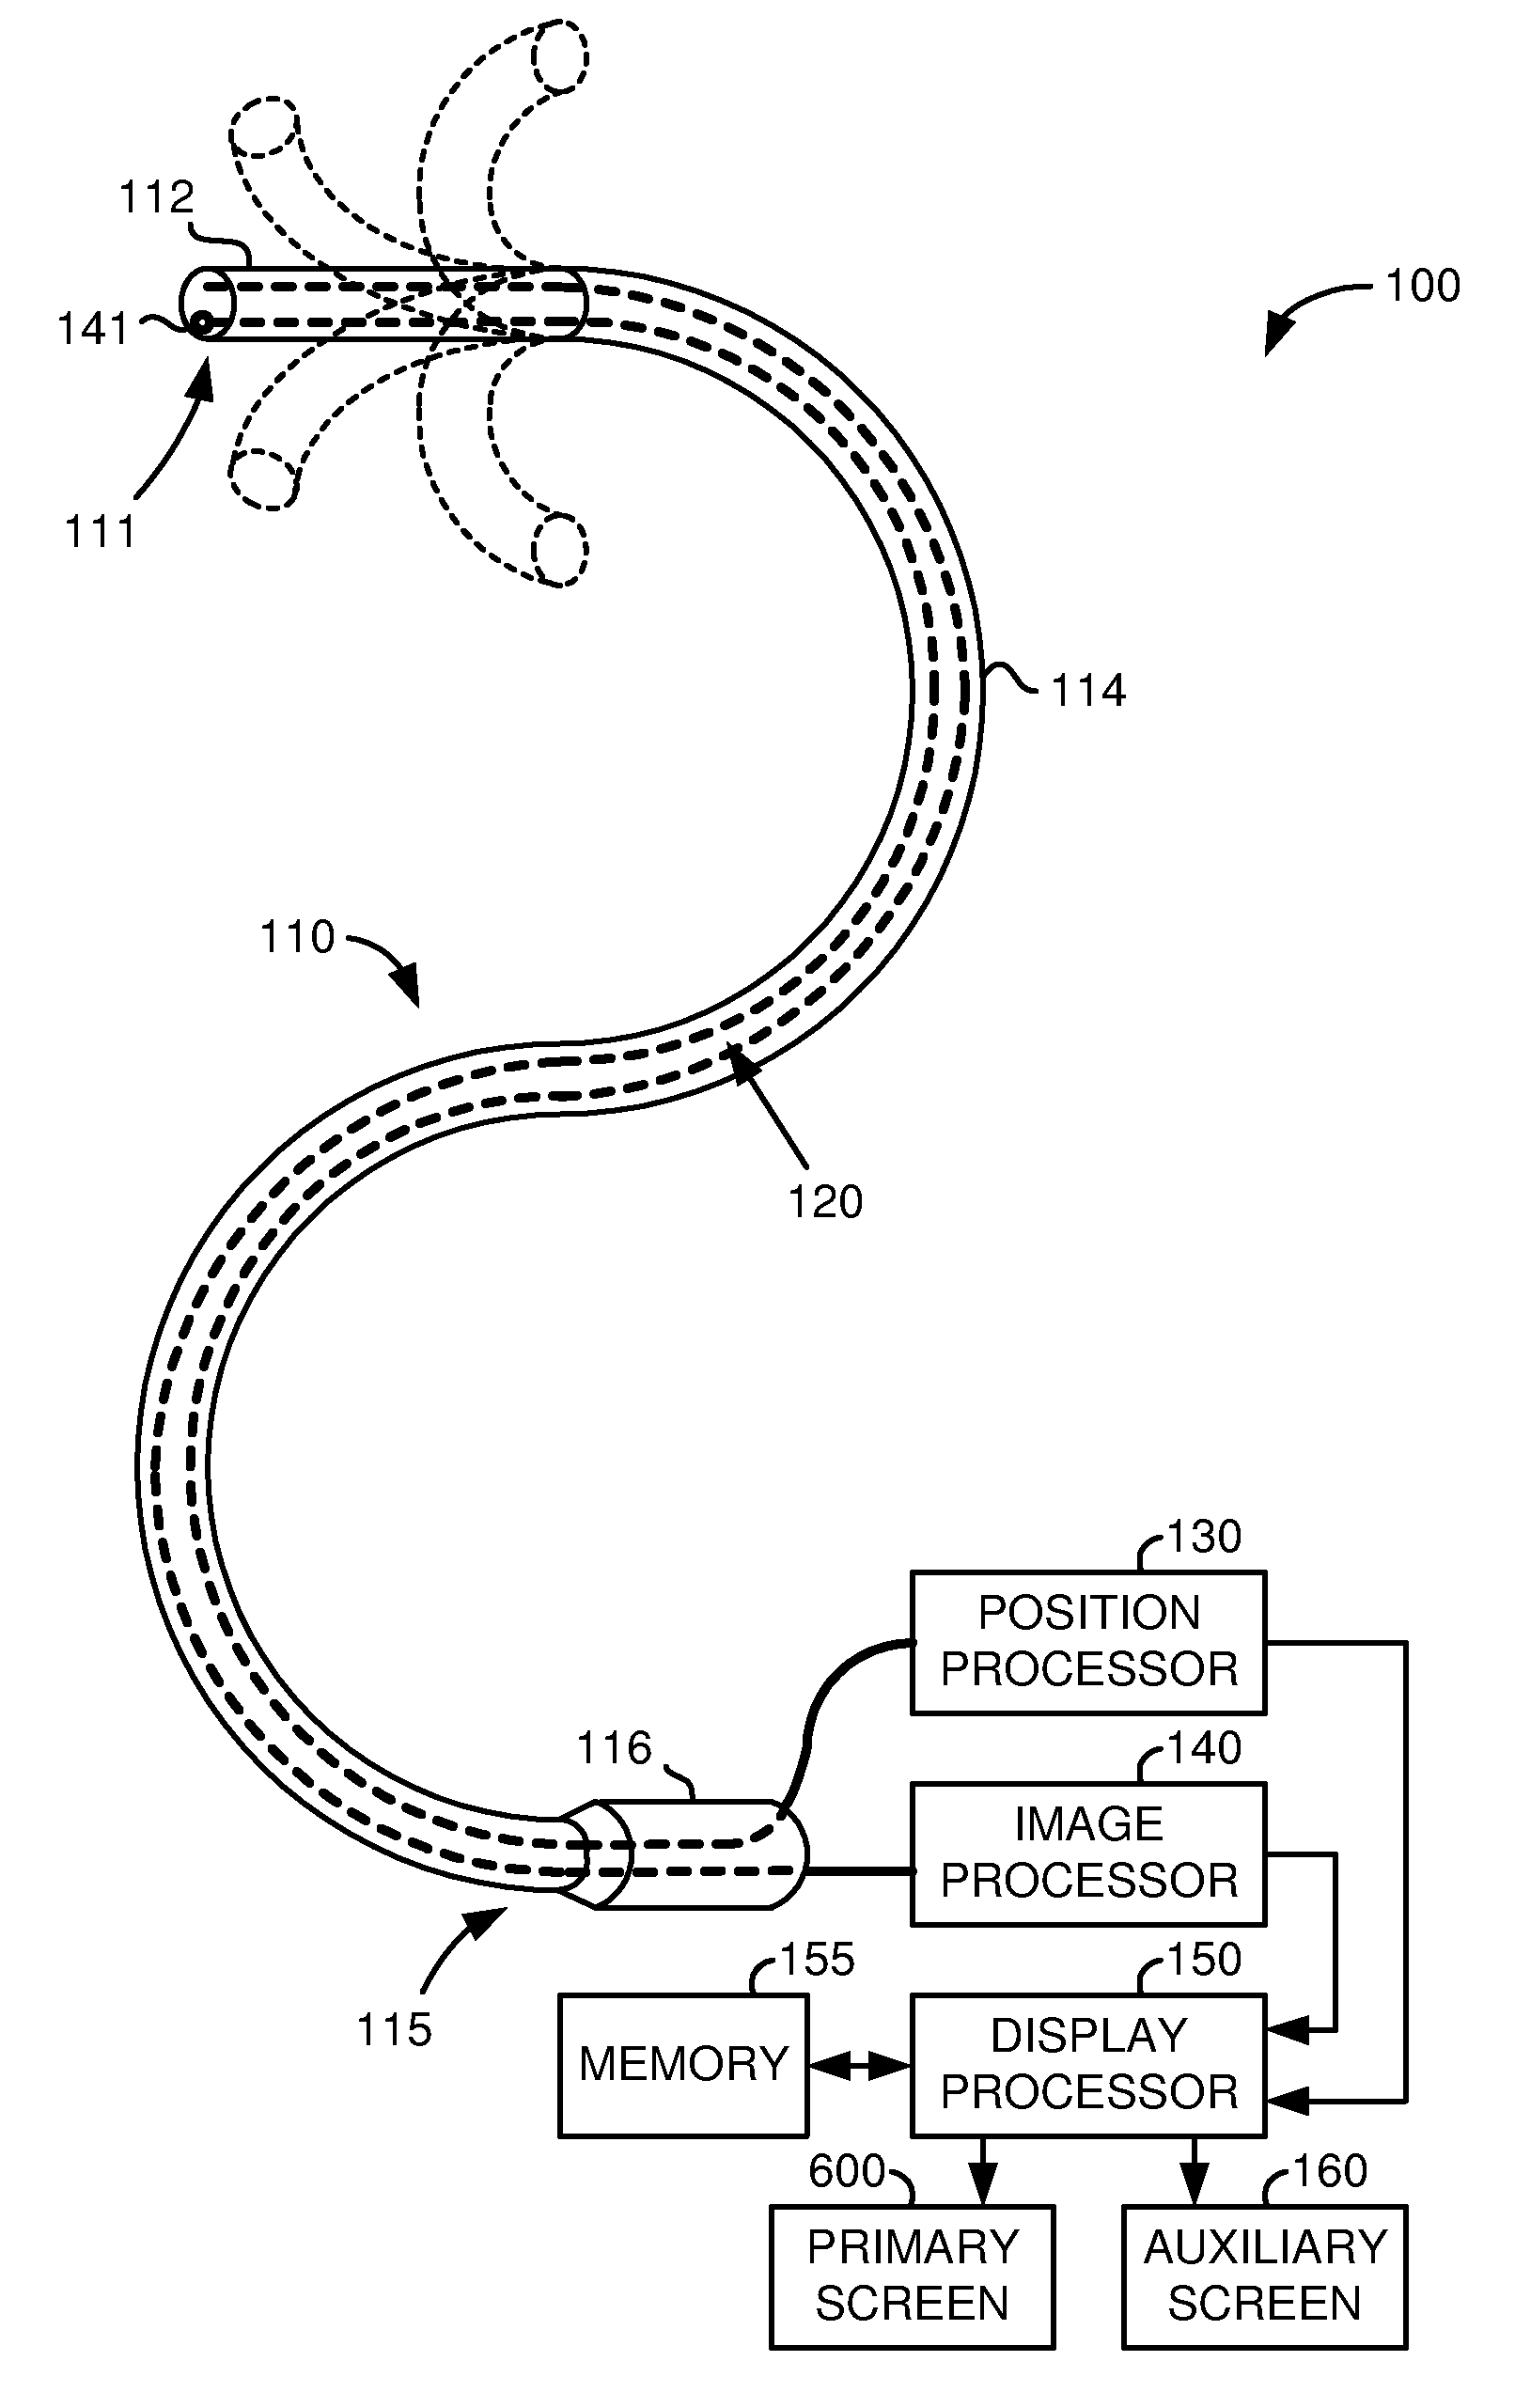 Method and system for providing visual guidance to an operator for steering a tip of an endoscopic device toward one or more landmarks in a patient